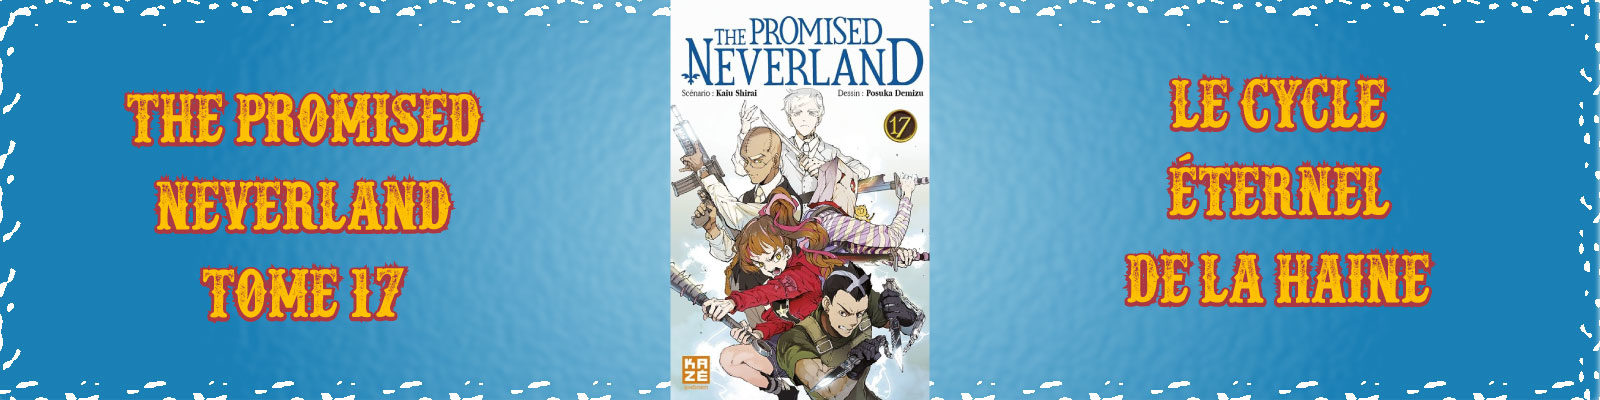 The Promised Neverland-Vol.-17